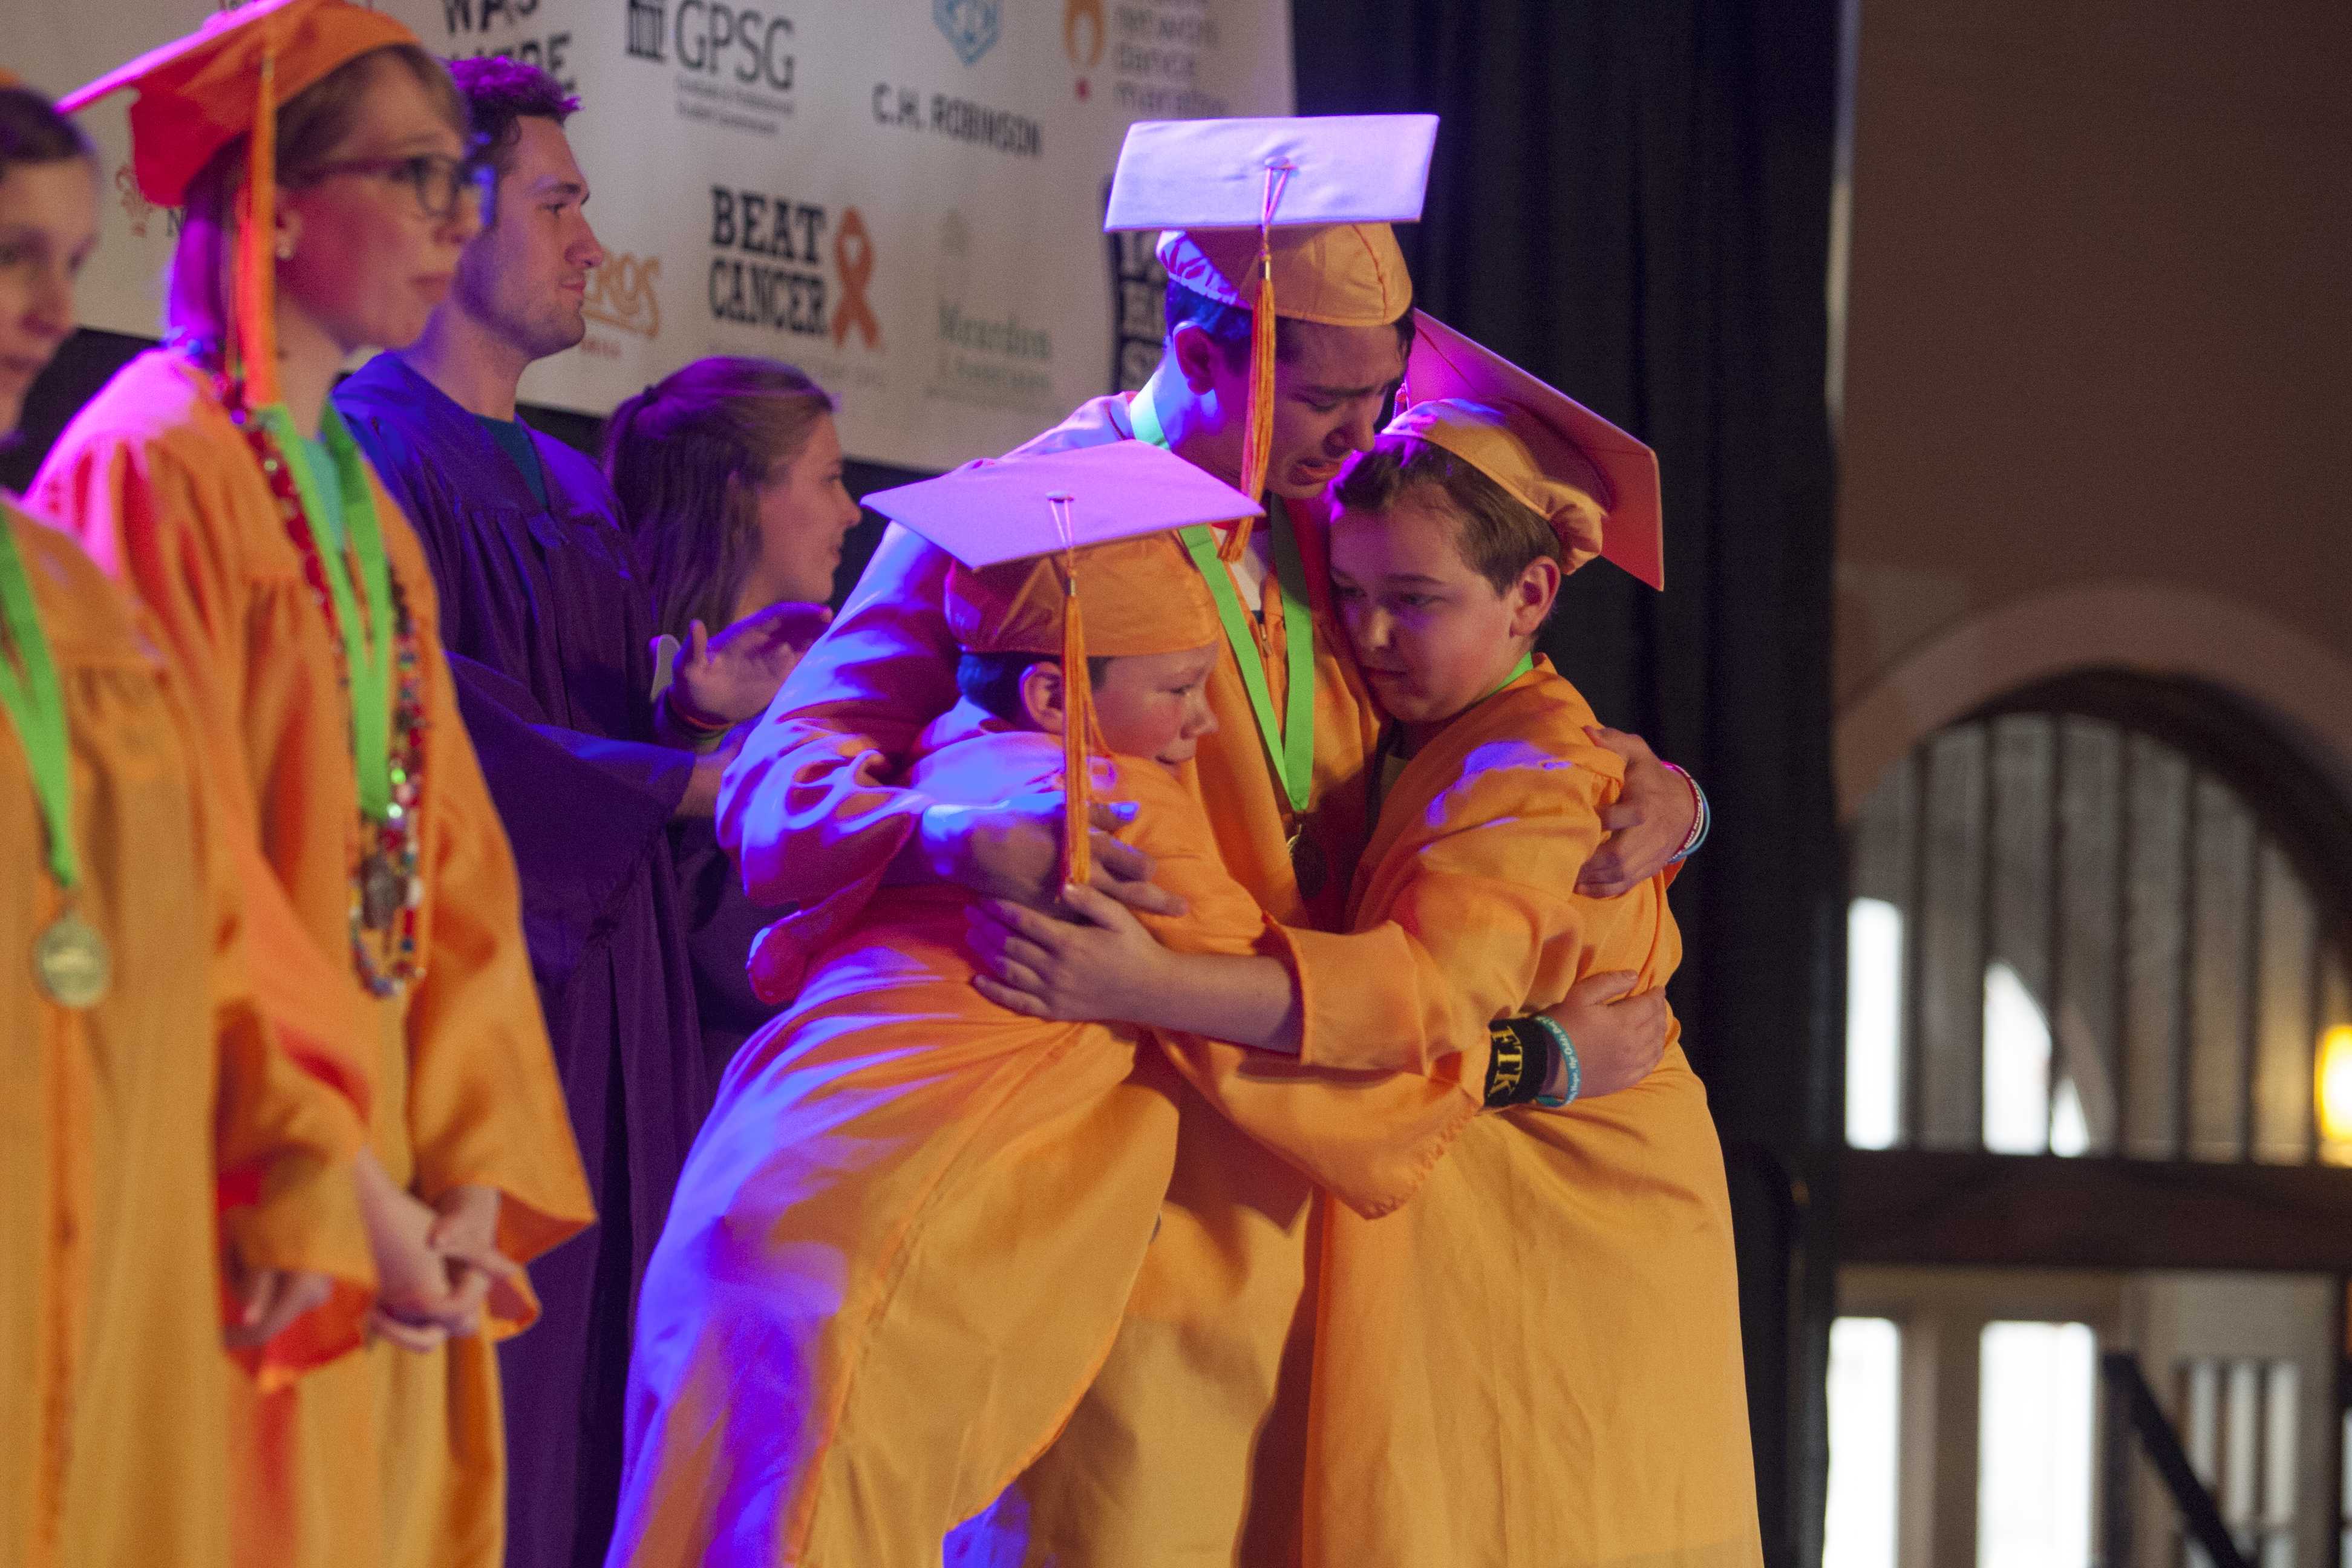 Friends share emotional hug as they take the stage together for graduation during UI Dance Marathon 24 at the IMU on Saturday, Feb. 3, 2018. (Katie Goodale/The Daily Iowan)